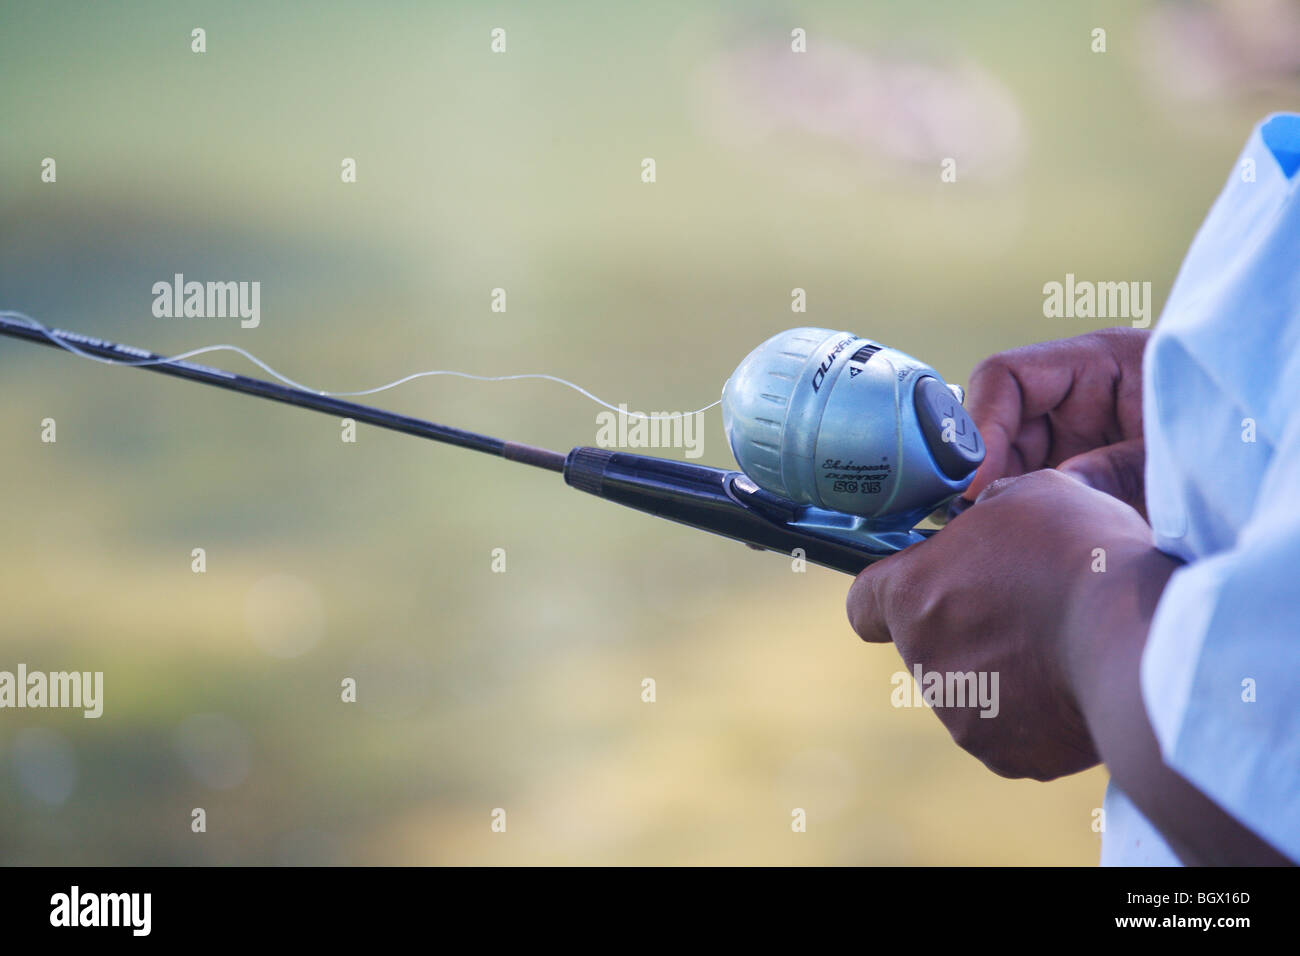 AFRICAN-AMERICAN HANDS HOLDING A SHAKESPEARE DURANGO SC15 ROD AND REEL  BLACK MAN ETHNIC GROUP MINORITY Stock Photo - Alamy